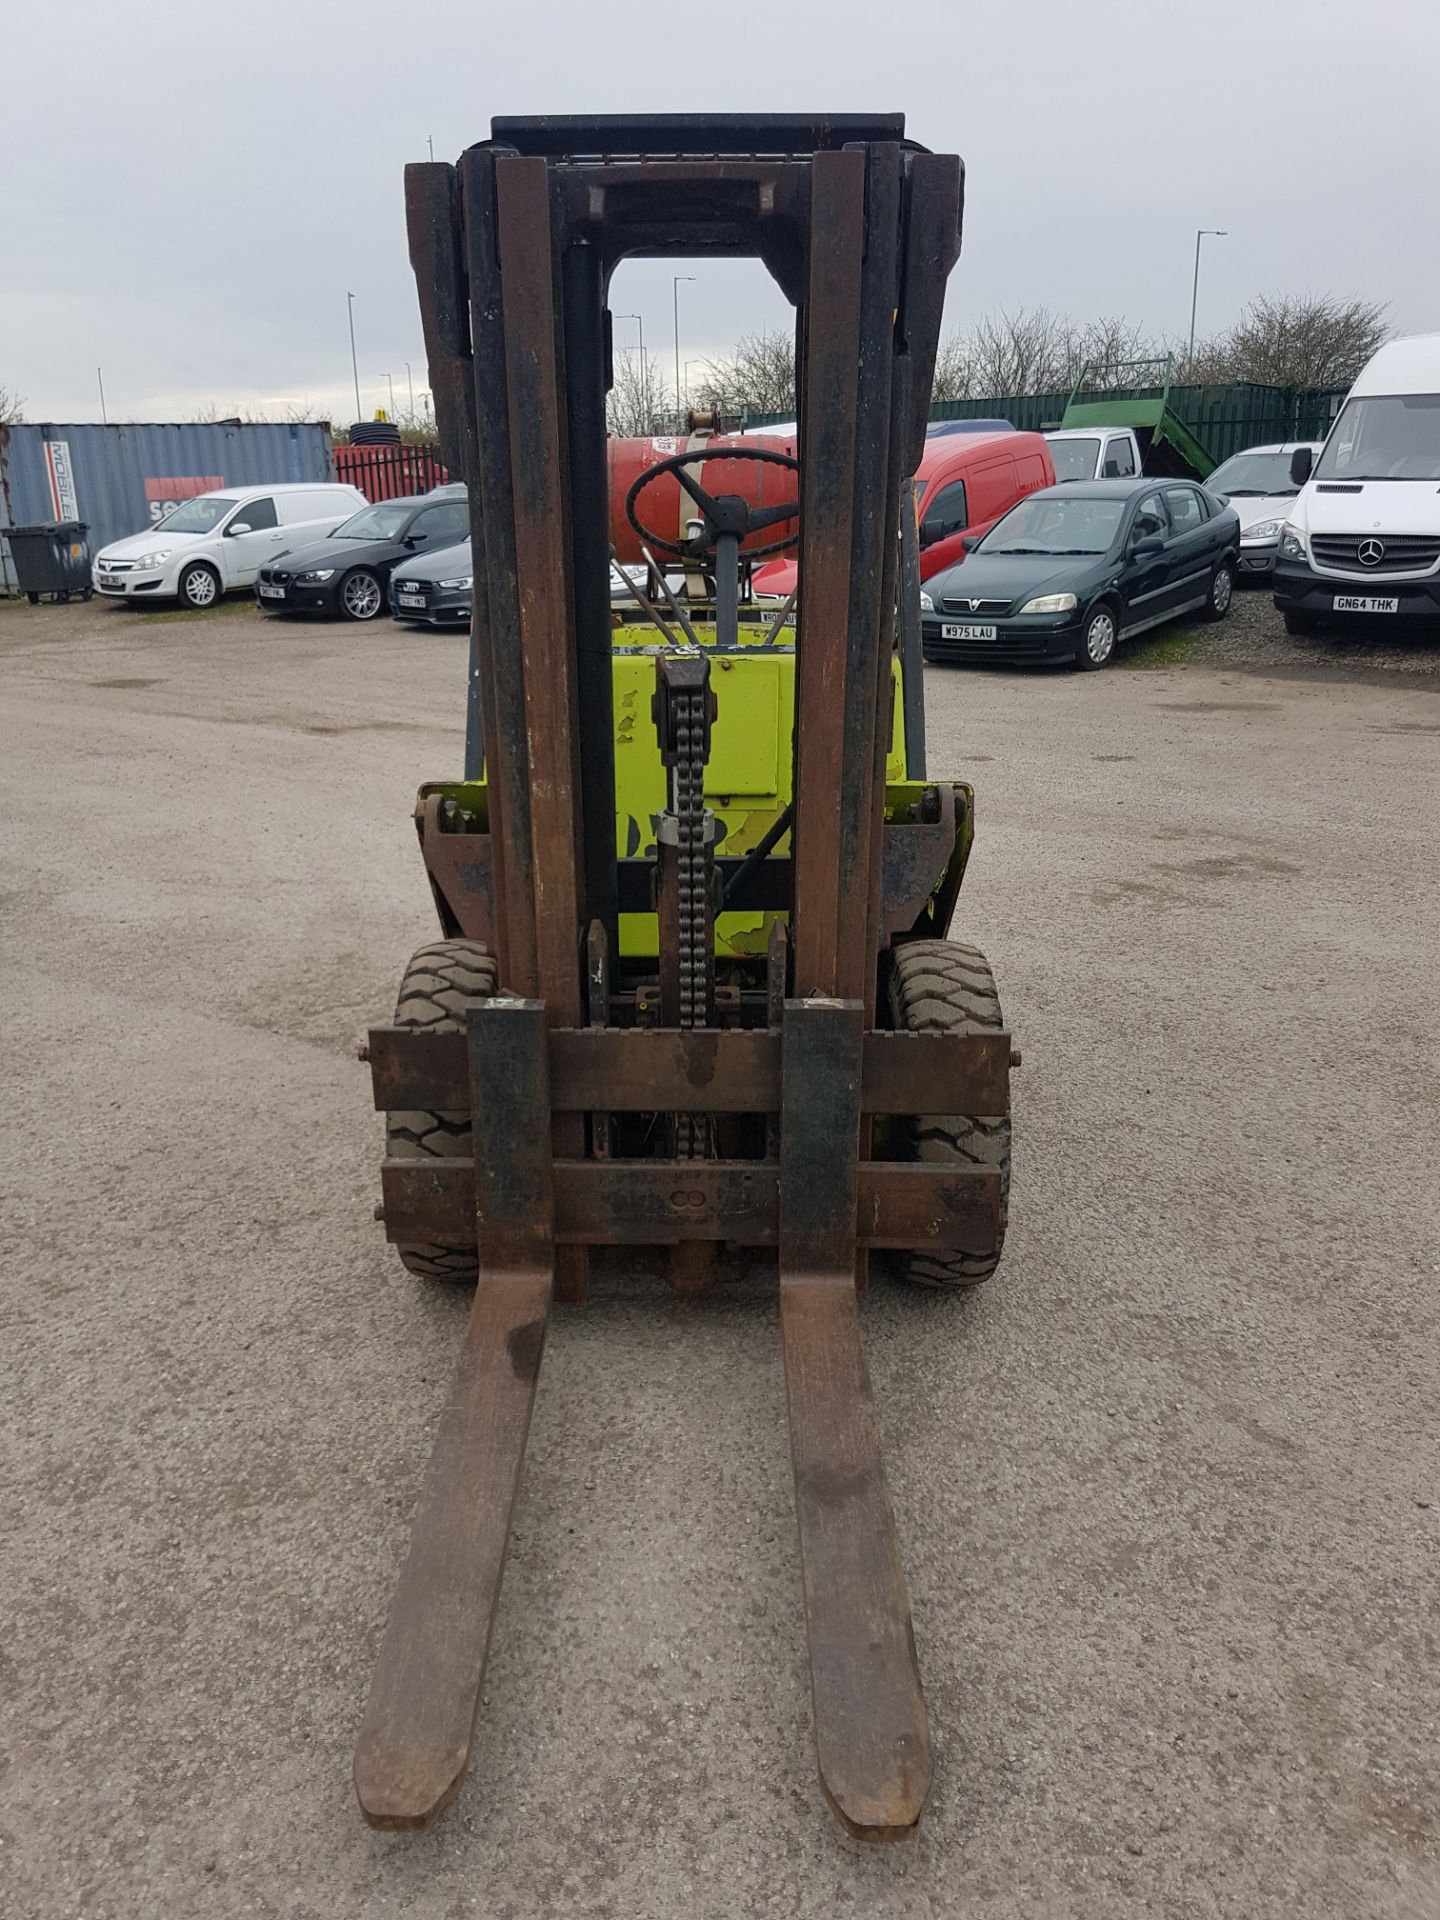 2.5 TONNE, CLARKE C500-Y50 GAS POWERED FORKLIFT, YEAR UNKNOWN - Image 2 of 17